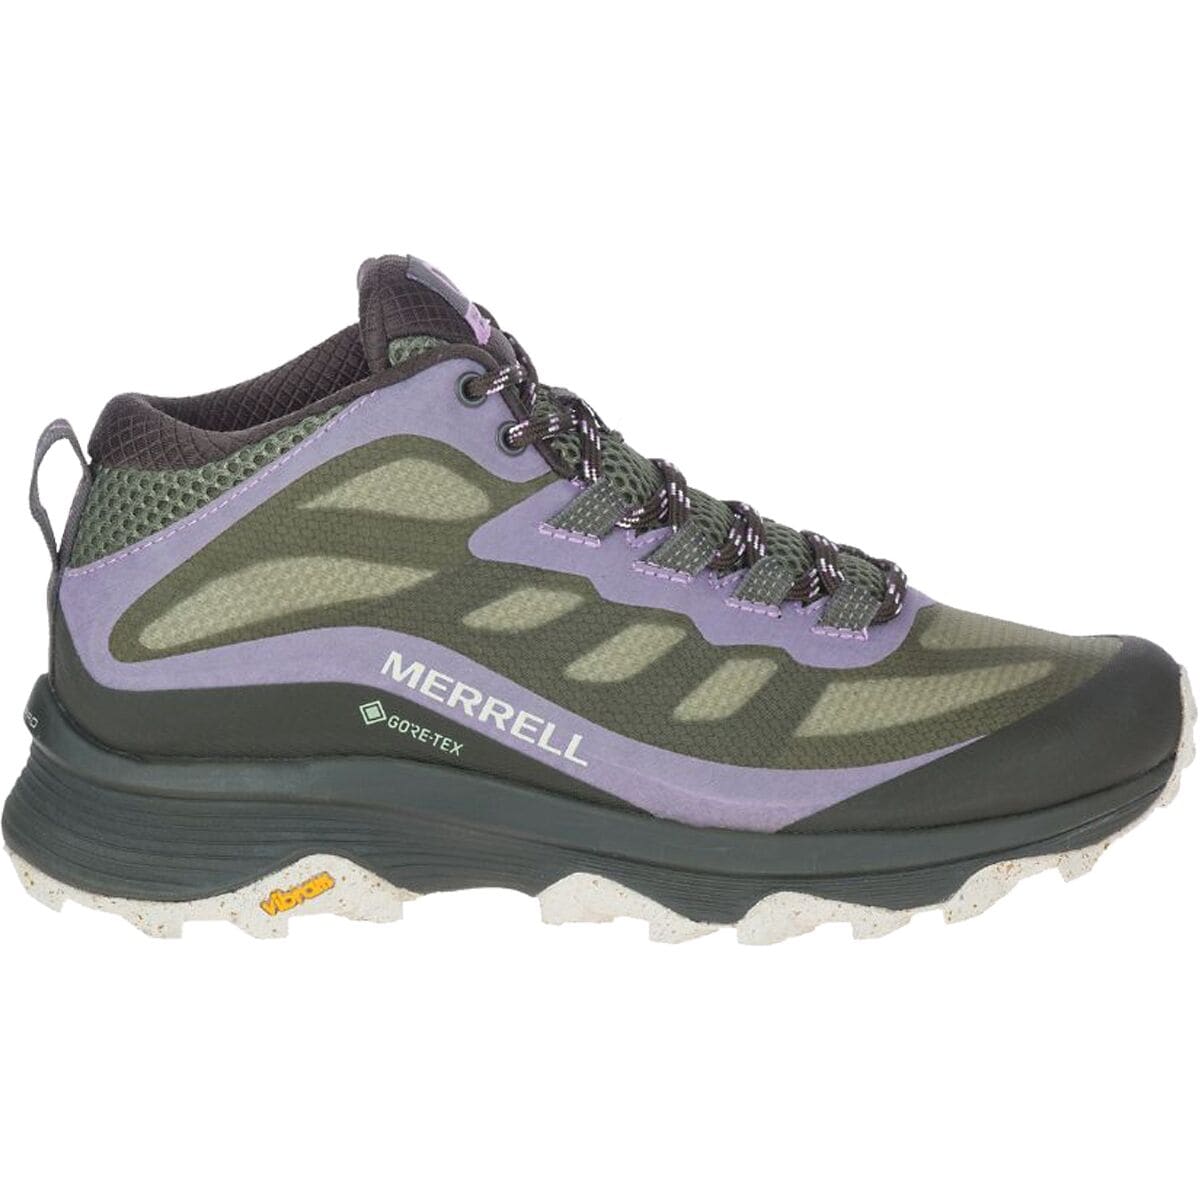 Moab Speed Mid GORE-TEX Hiking Shoe - Women's by Merrell |